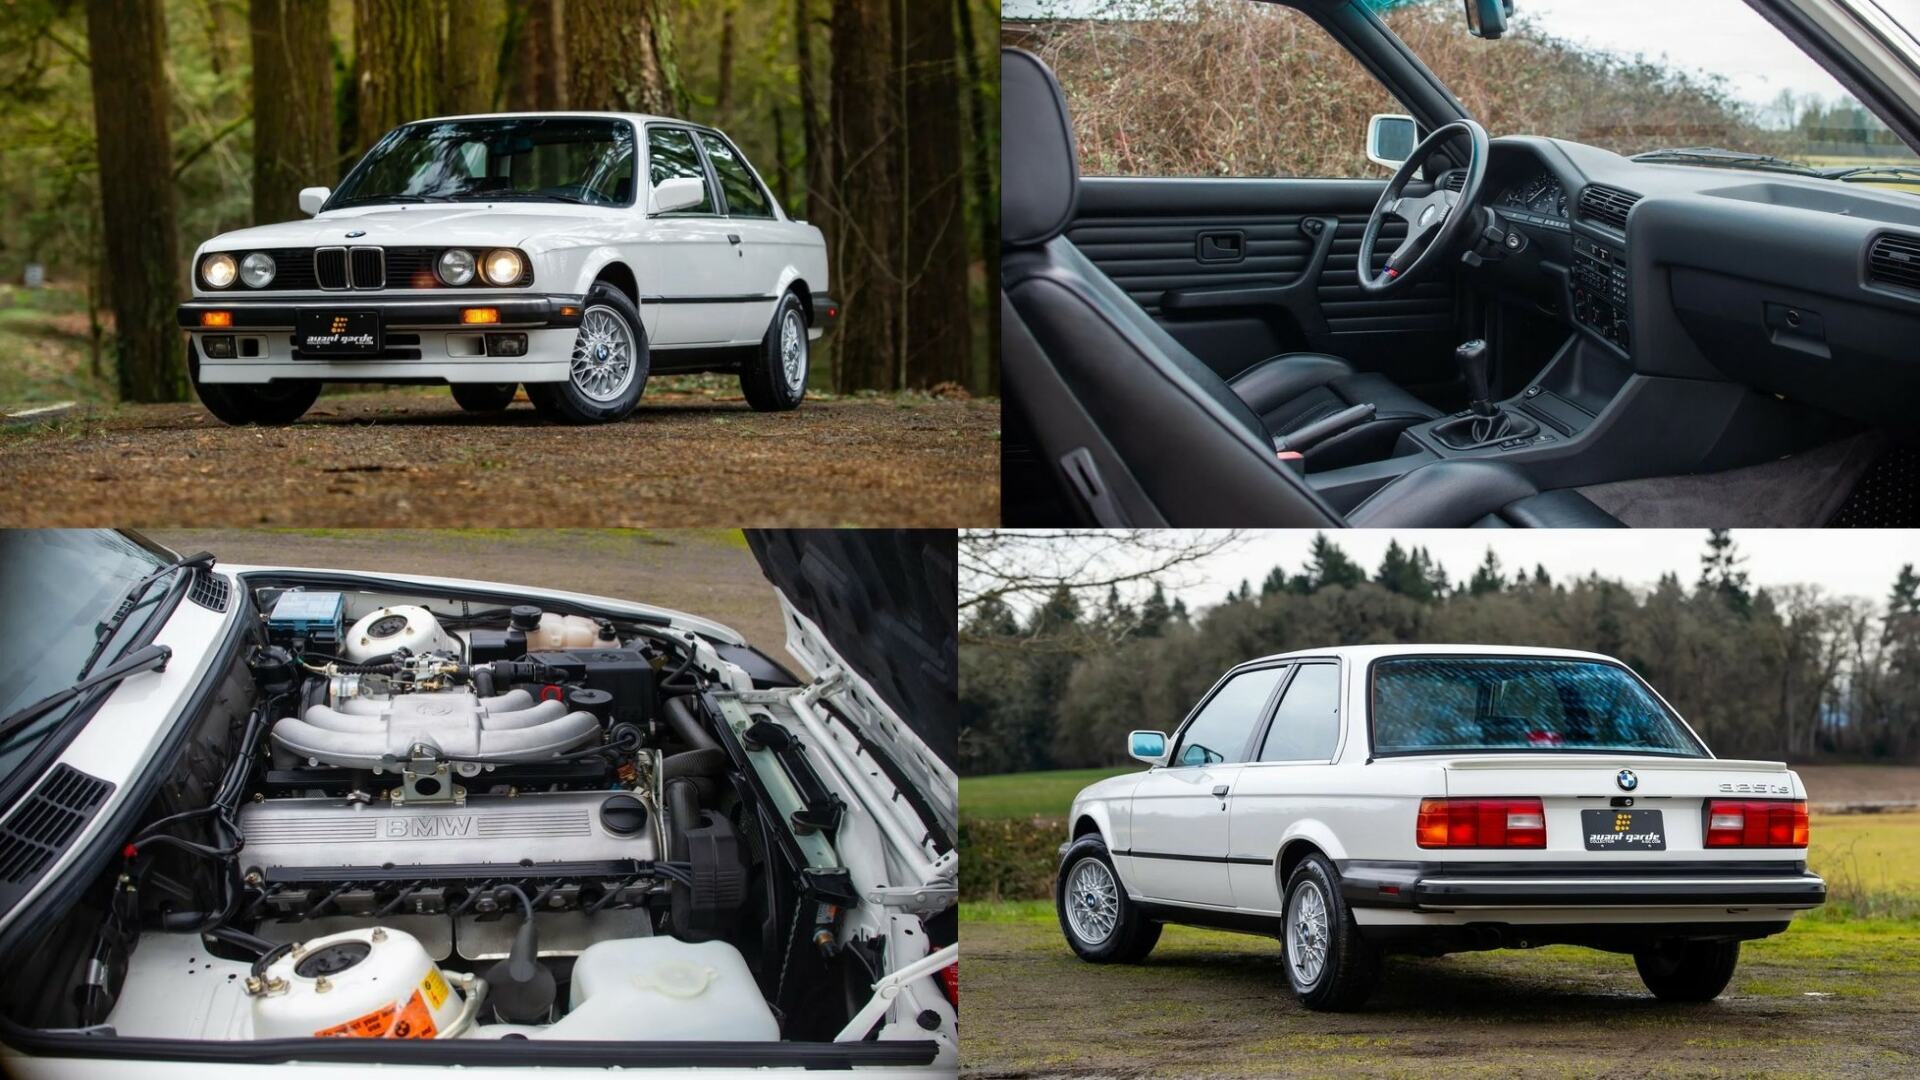 A Full Interior & Exterior View Of The 1988 BMW 325is (Credits BMW)